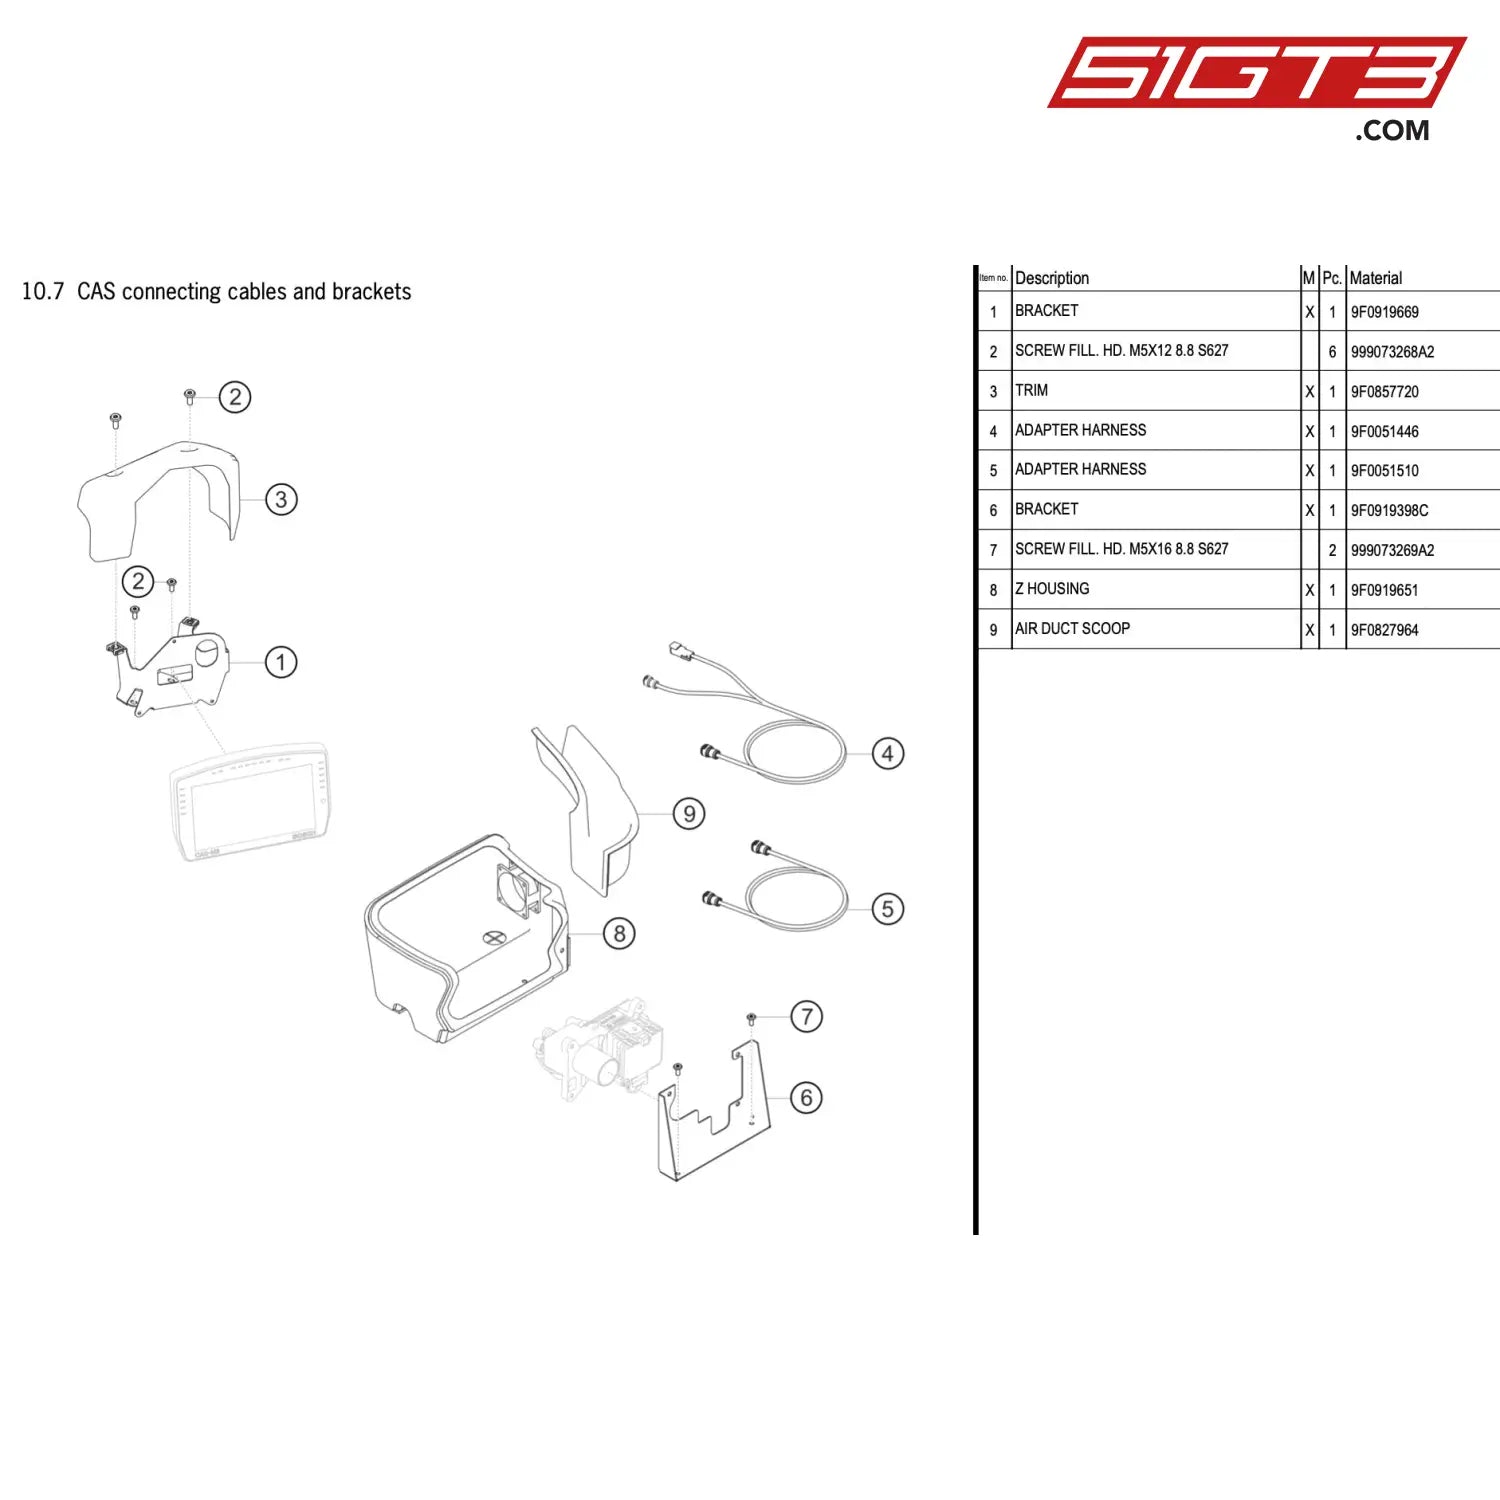 Air Duct Scoop - 9F0827964 [Porsche 911 Gt3 R Type 991 (Gen 2)] Cas Connecting Cables And Brackets